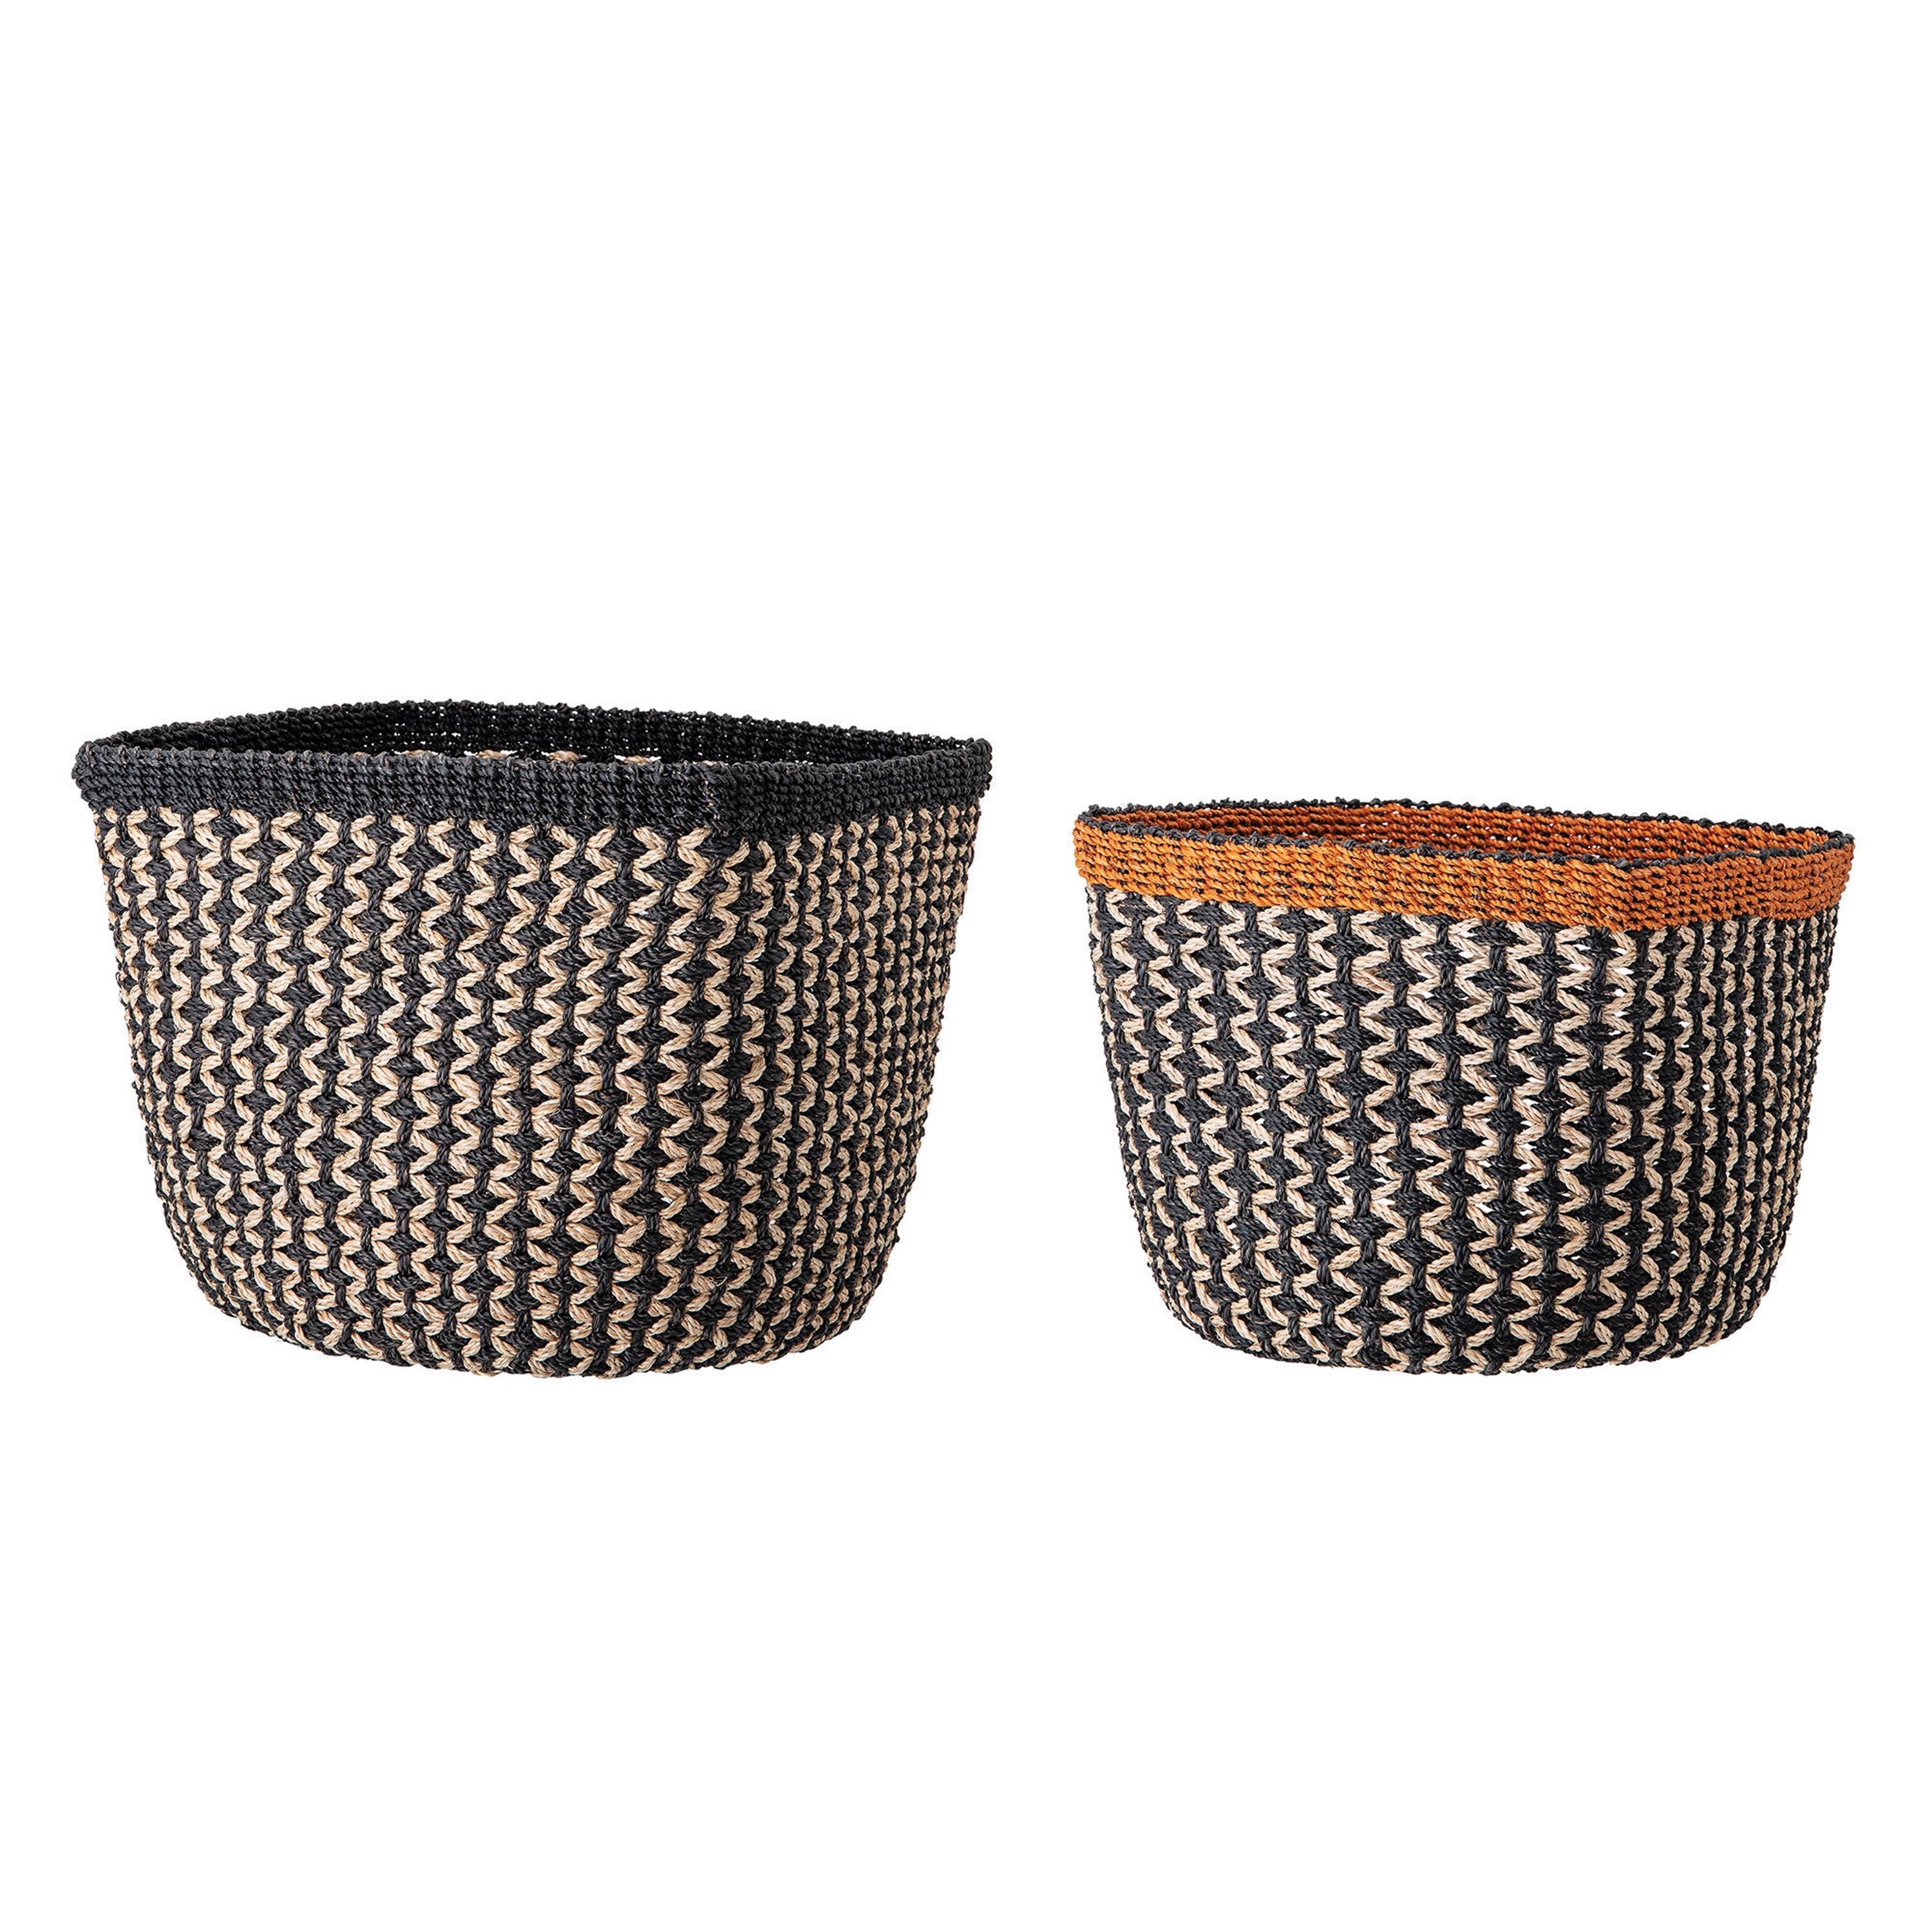 14" & 16" Handwoven Abaca Baskets (Set of 2 Sizes/Colors) - Image 0